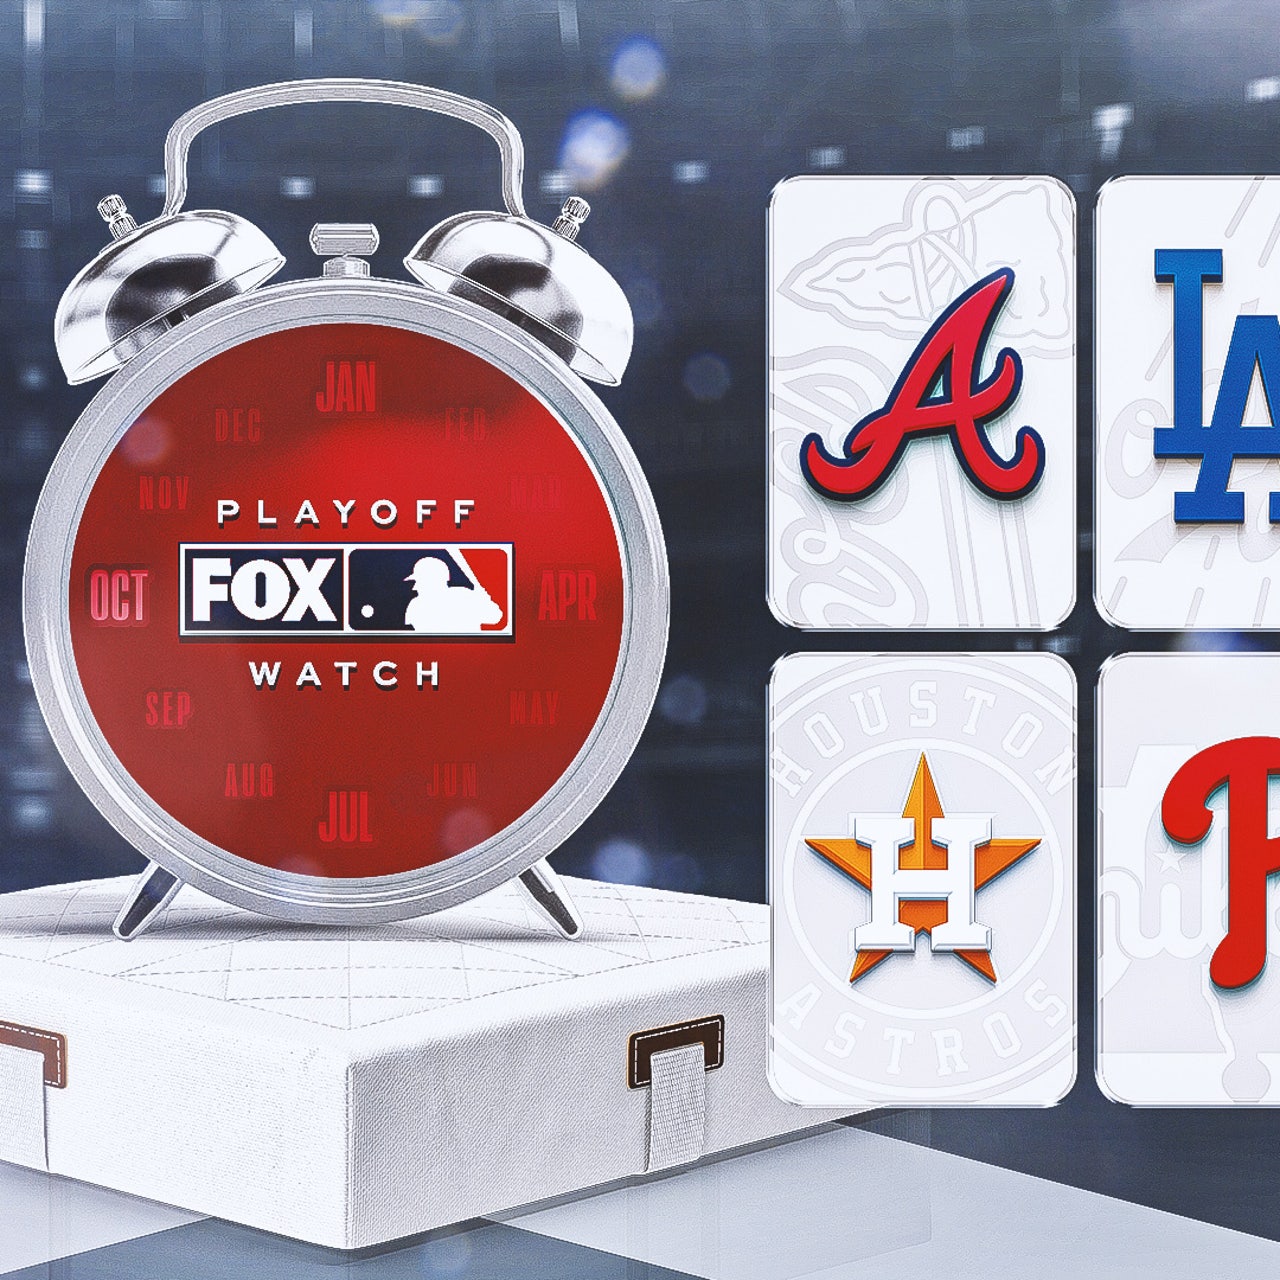 MLB Playoff Watch: Ranking the lineups of every contender